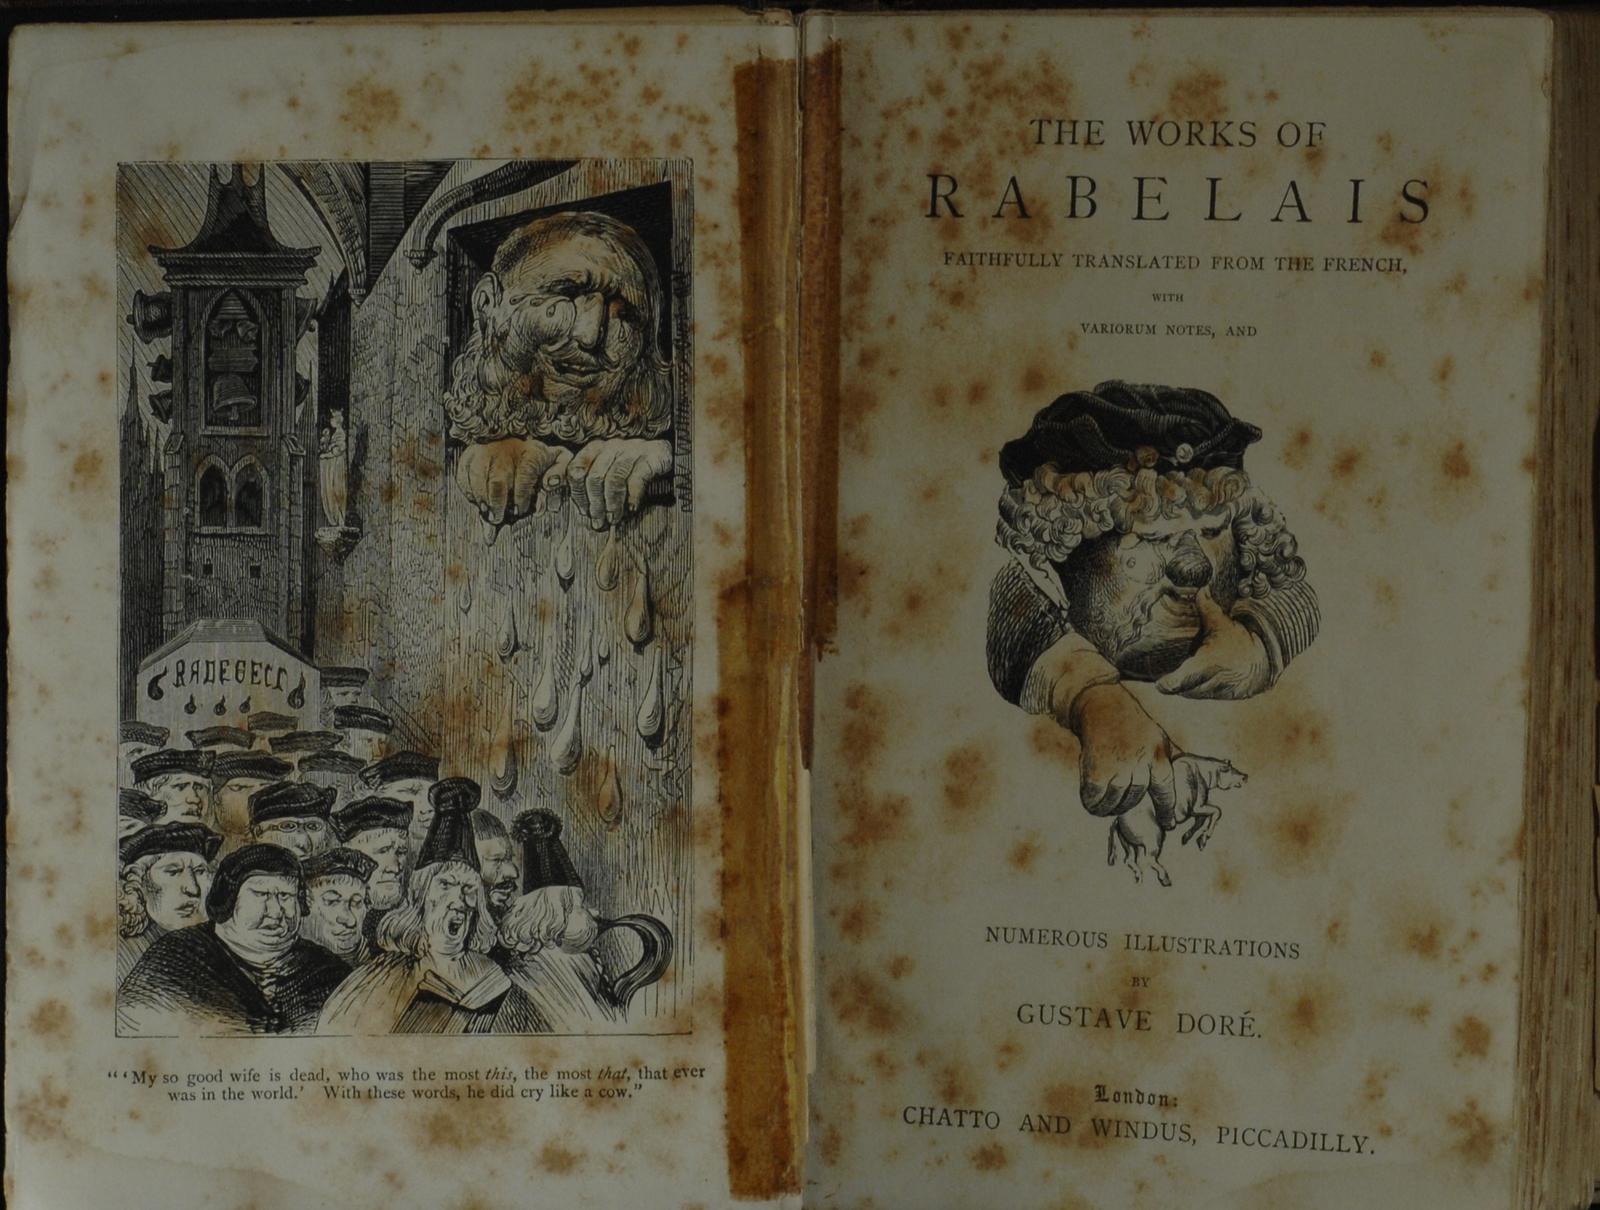 mbb006736d_-_Rabelais_Francois_-_The_Works_of_Rabelais.Faithfully_Translated_from_the_French.With_Variorum_Notes_and_Frontispiece_-_GUSTAV_DORE.jpg